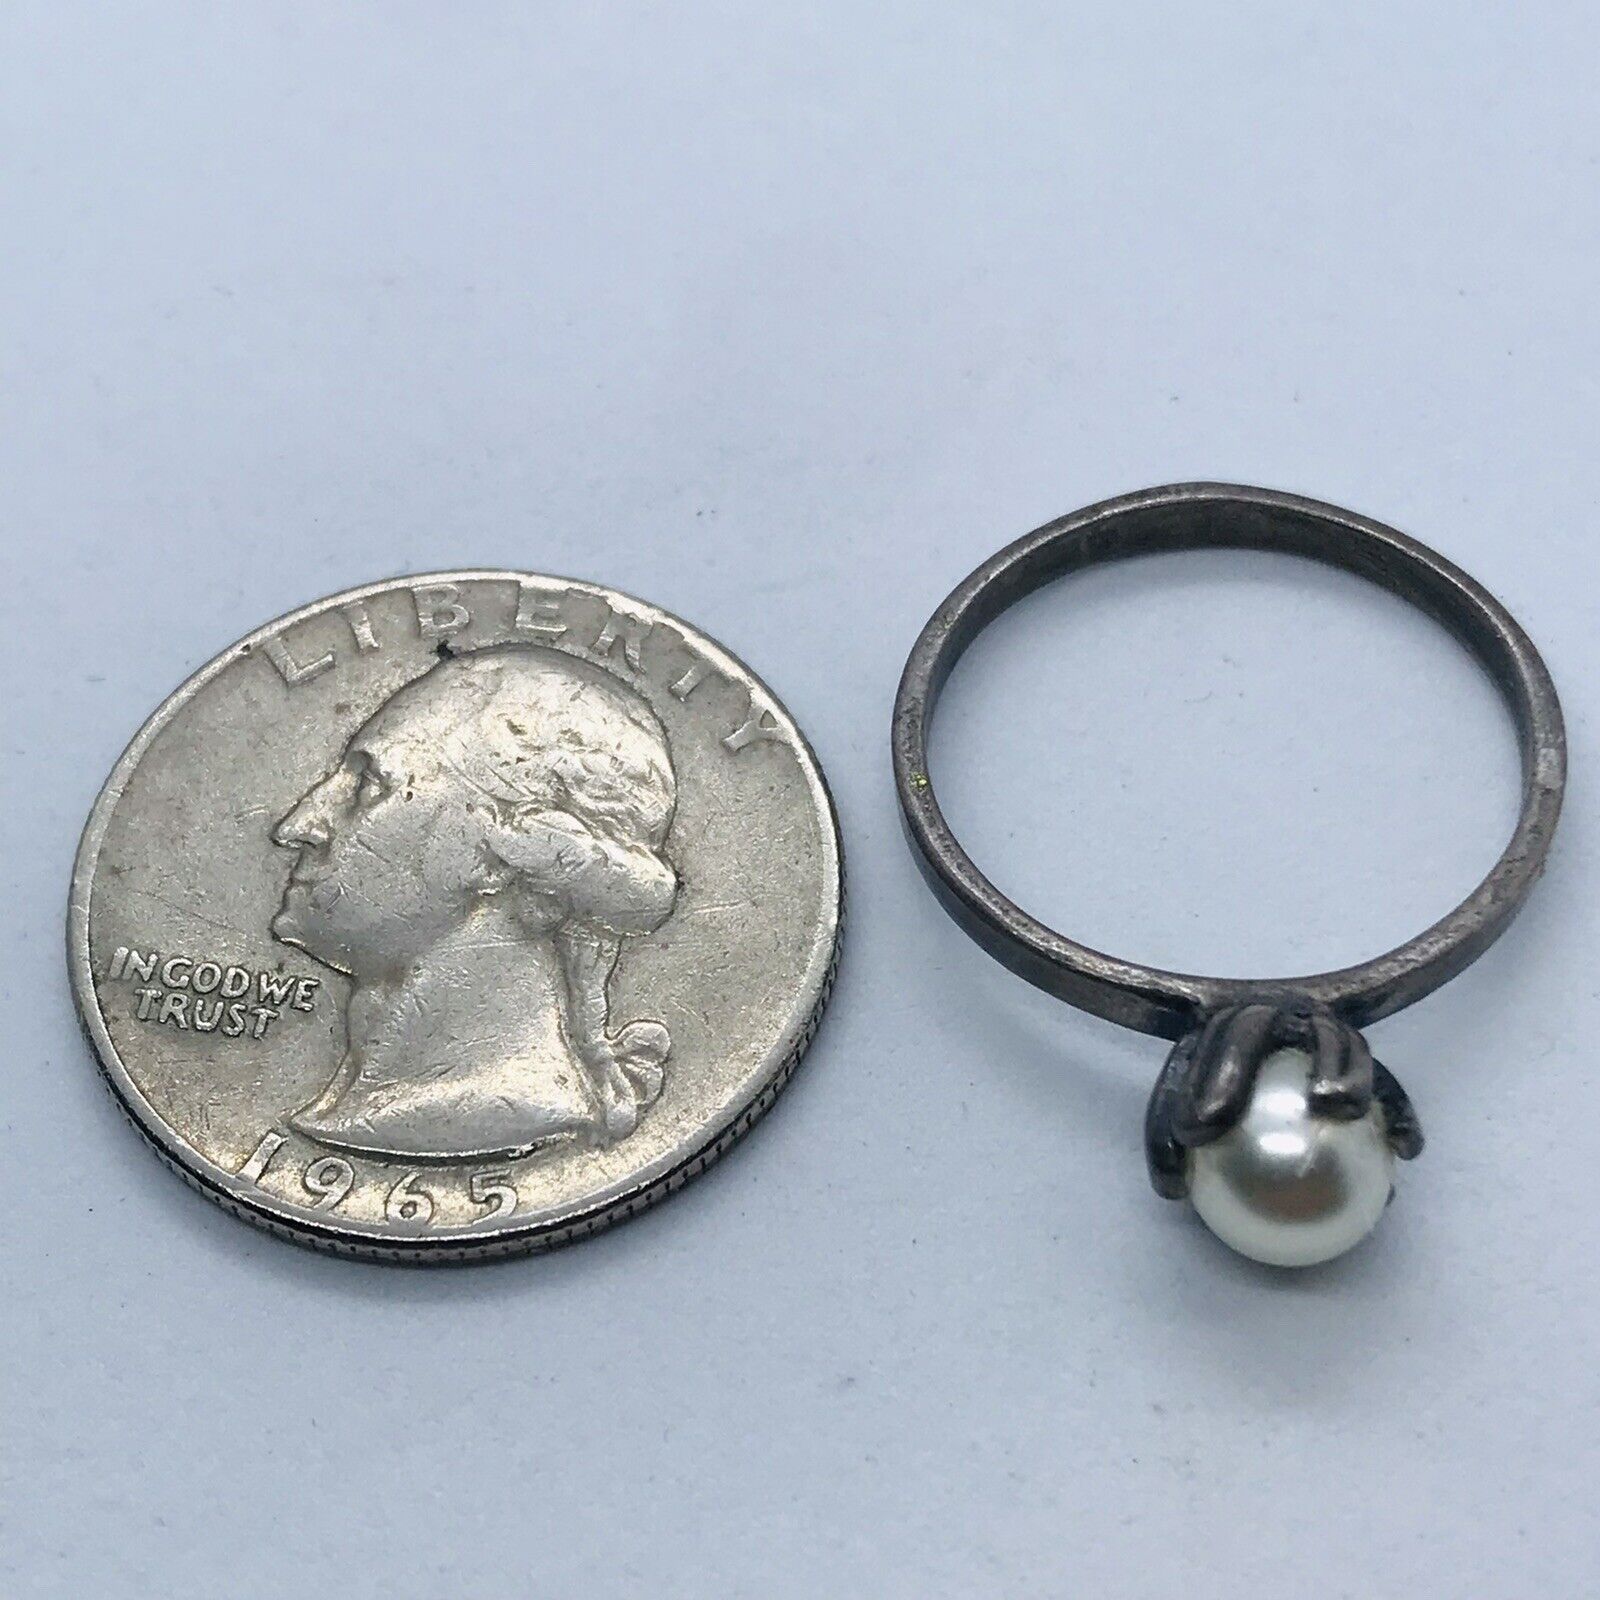 2g 925 SIZE 8 ANTIQUE FOREIGN HALLMARK STERLING SILVER RING FAUX PEARL FINE